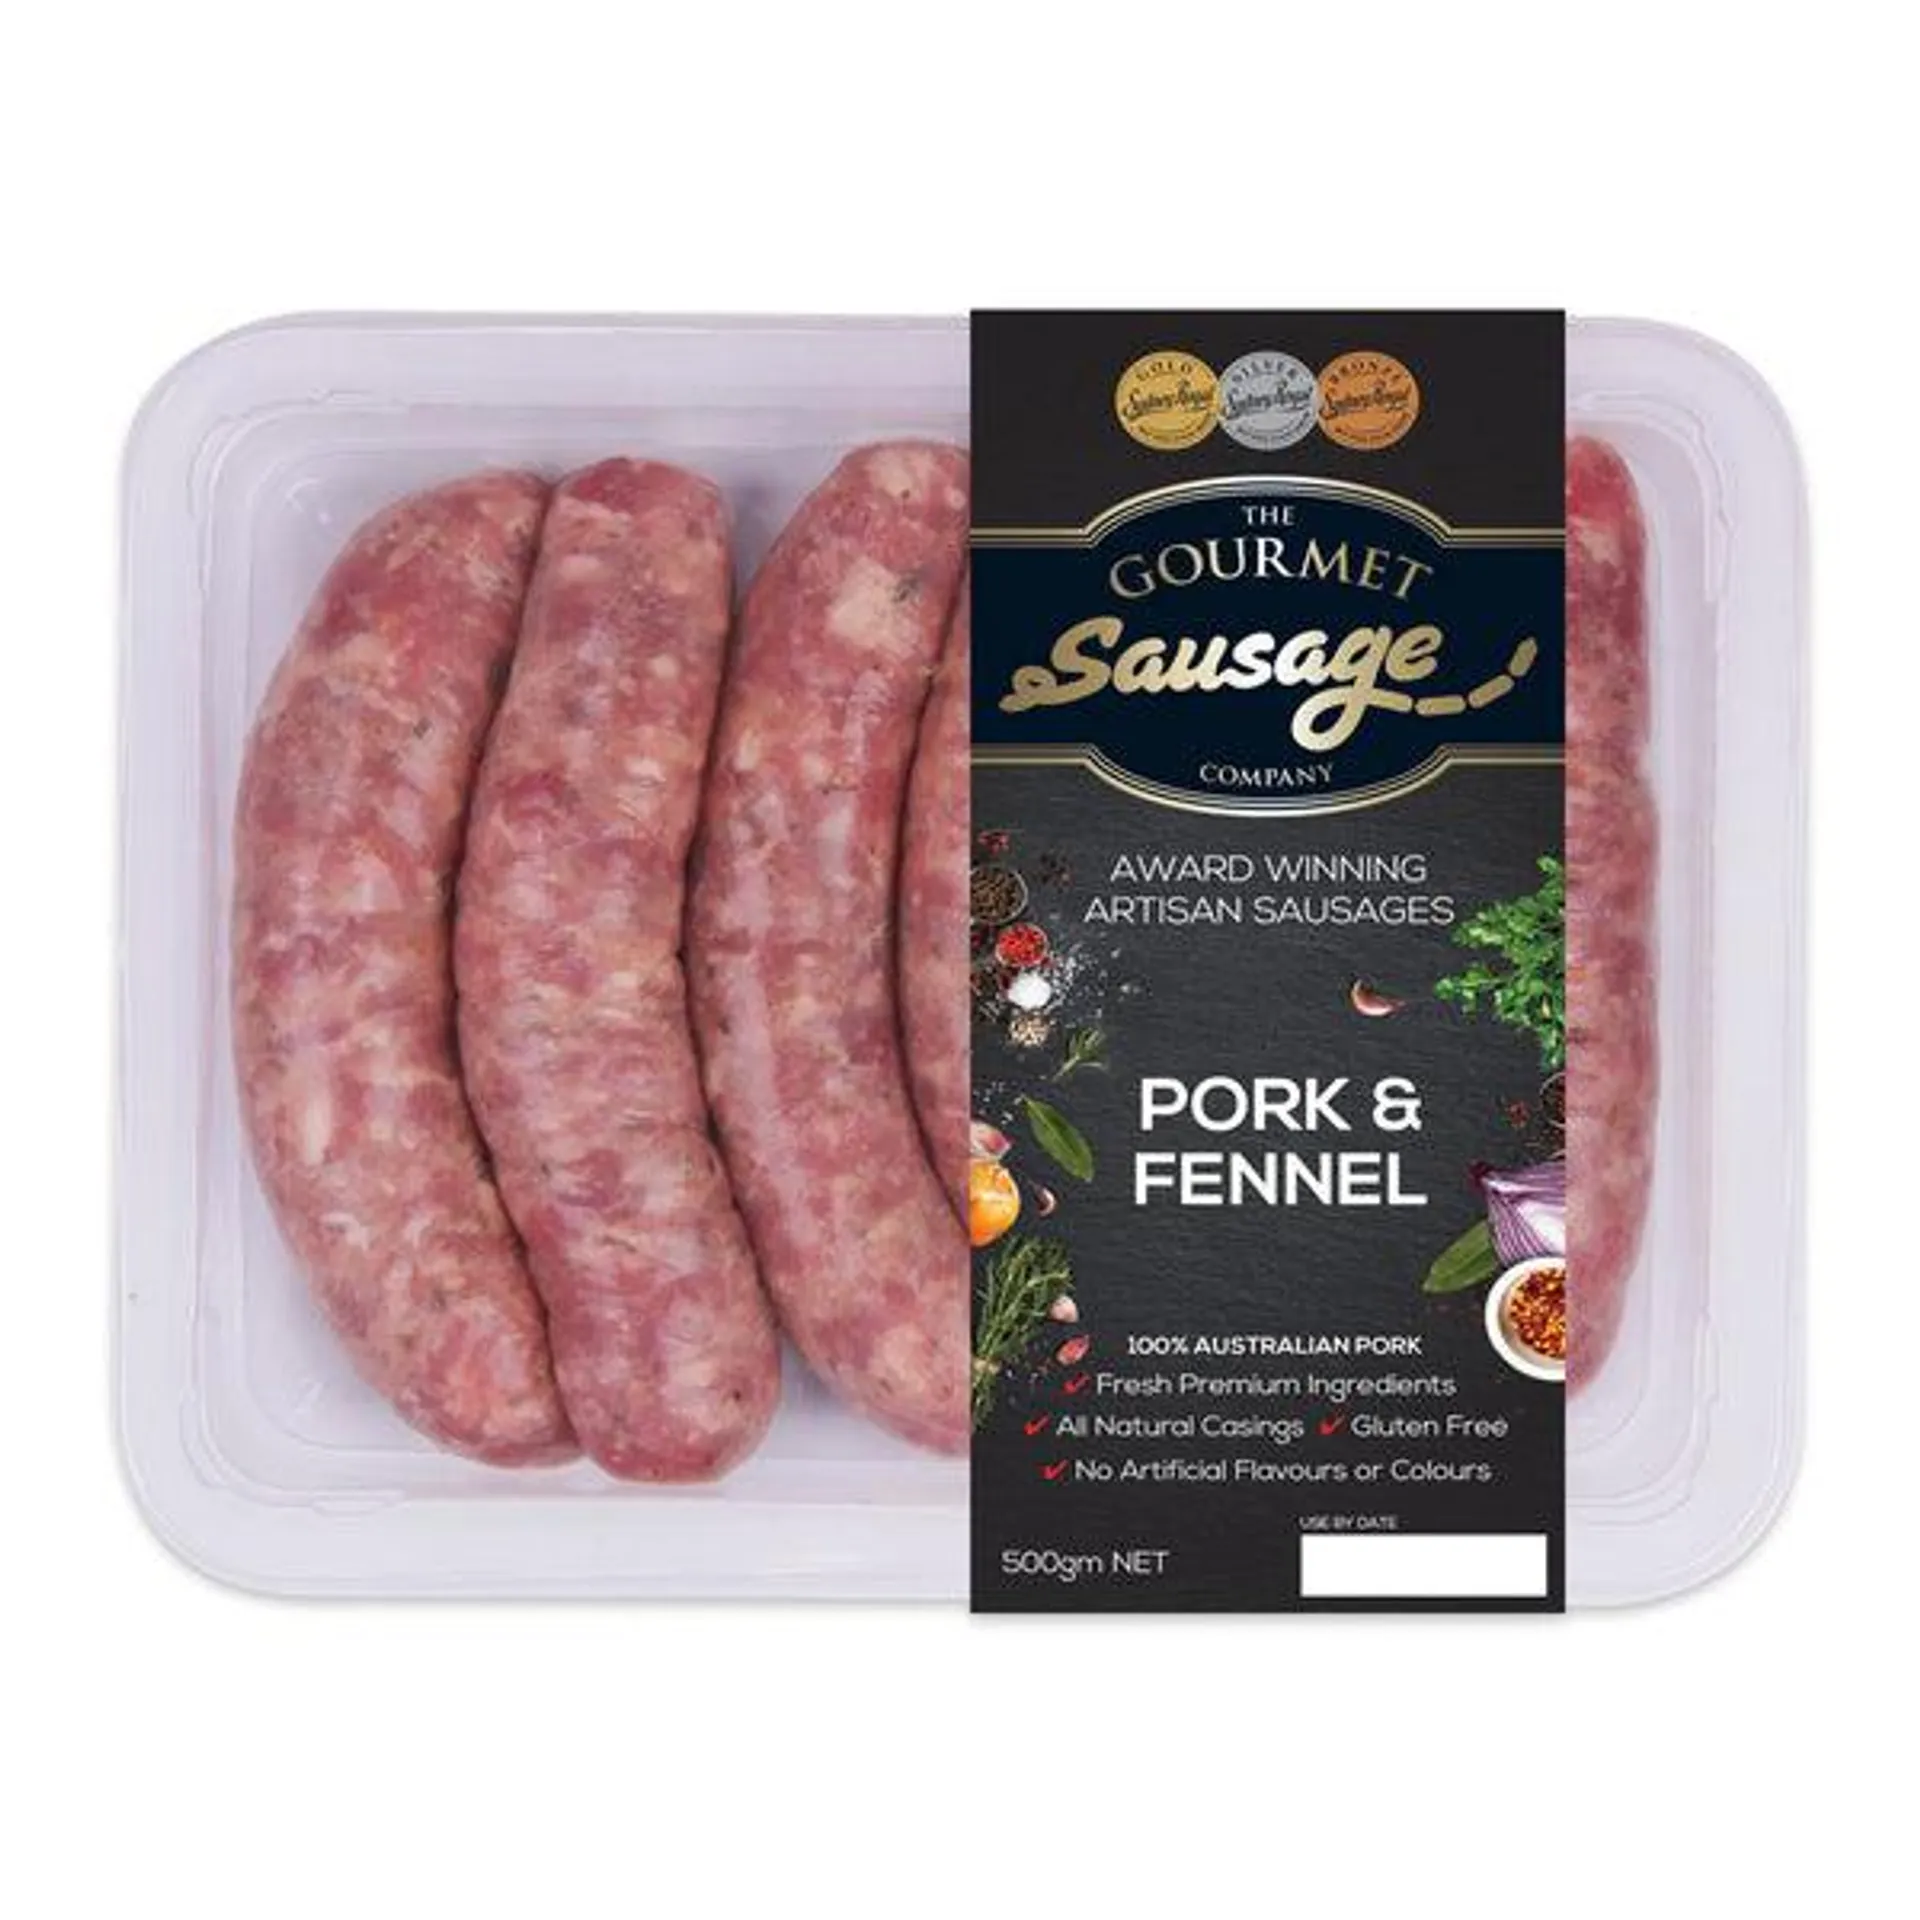 The Gourmet Sausage Pork and Fennel Sausages 500g